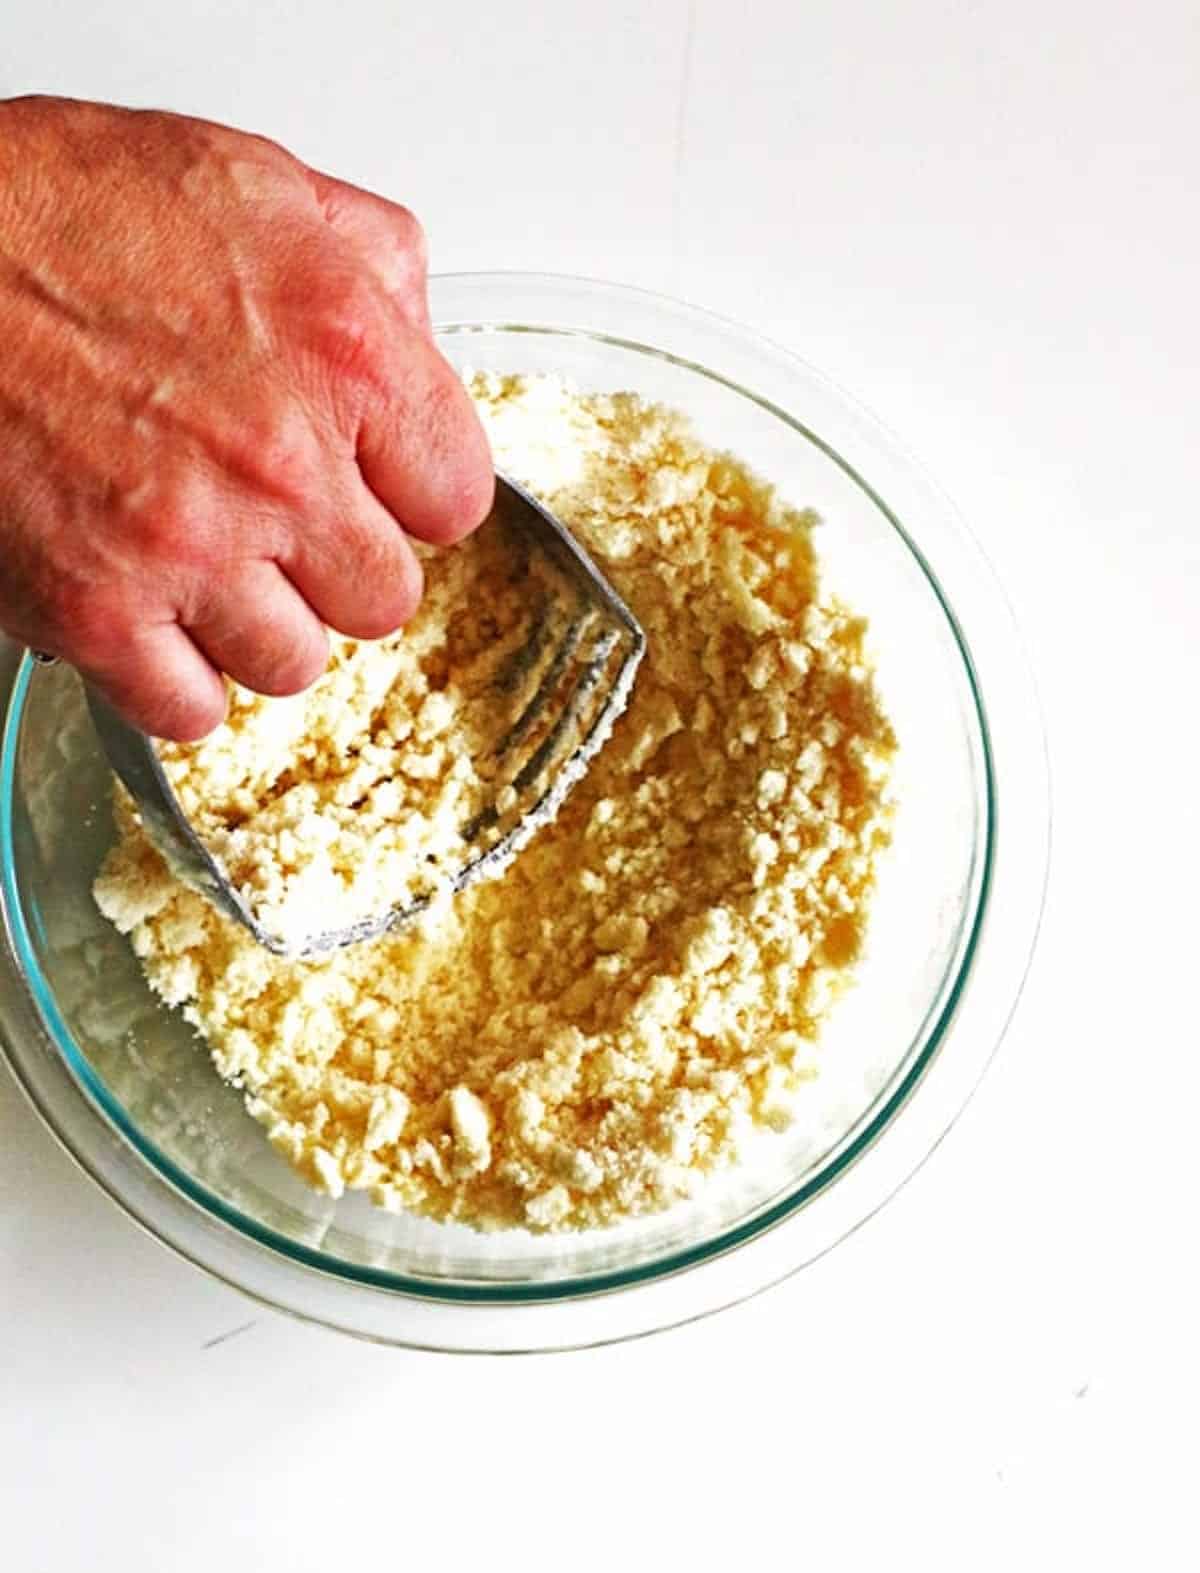 Making crumb topping for an apple pie by using a pastry blender to combine flour, sugar and softened butter